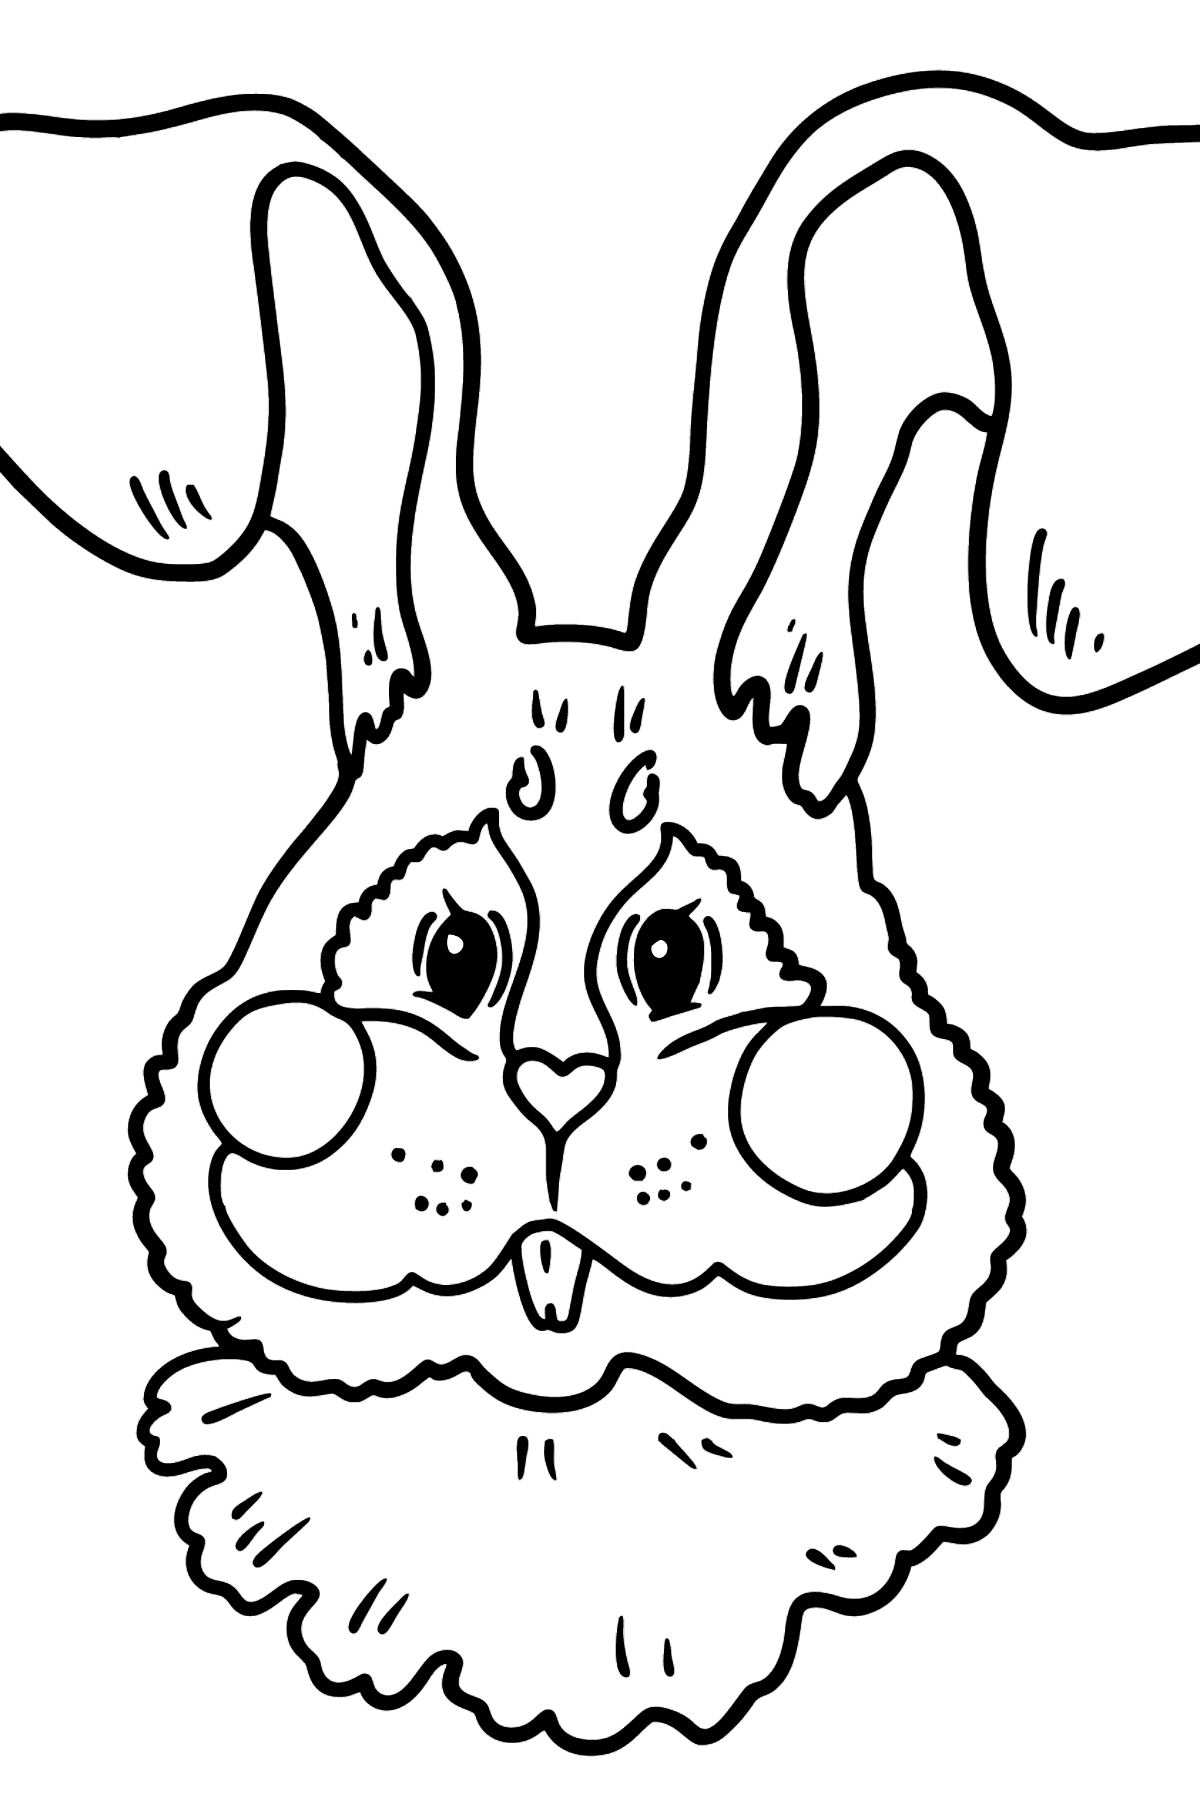 Bunny Face coloring page - Coloring Pages for Kids